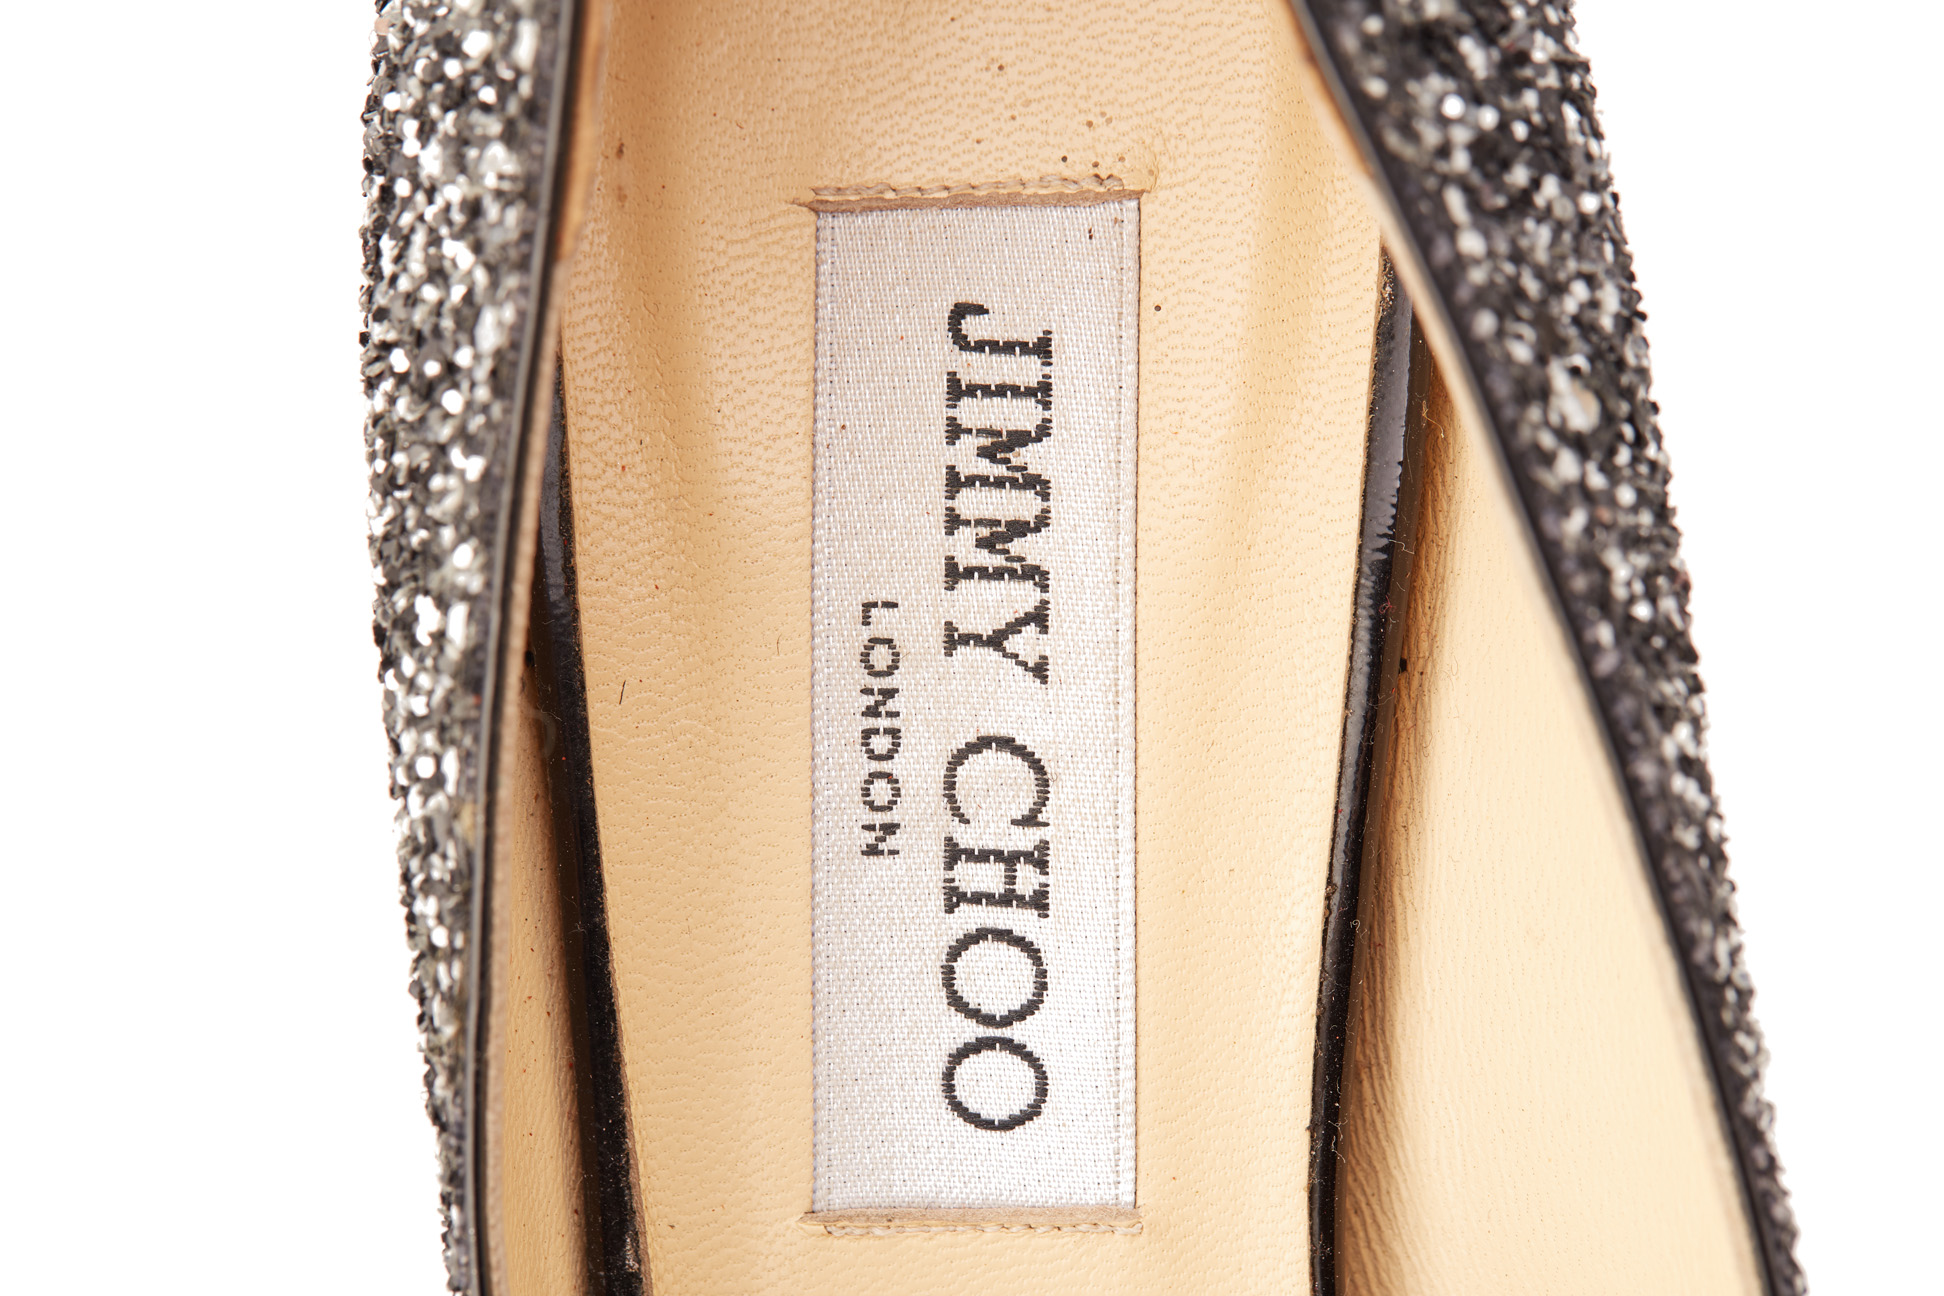 A PAIR OF JIMMY CHOO SILVER SPARKLY HEELS EU 36 - Image 3 of 3